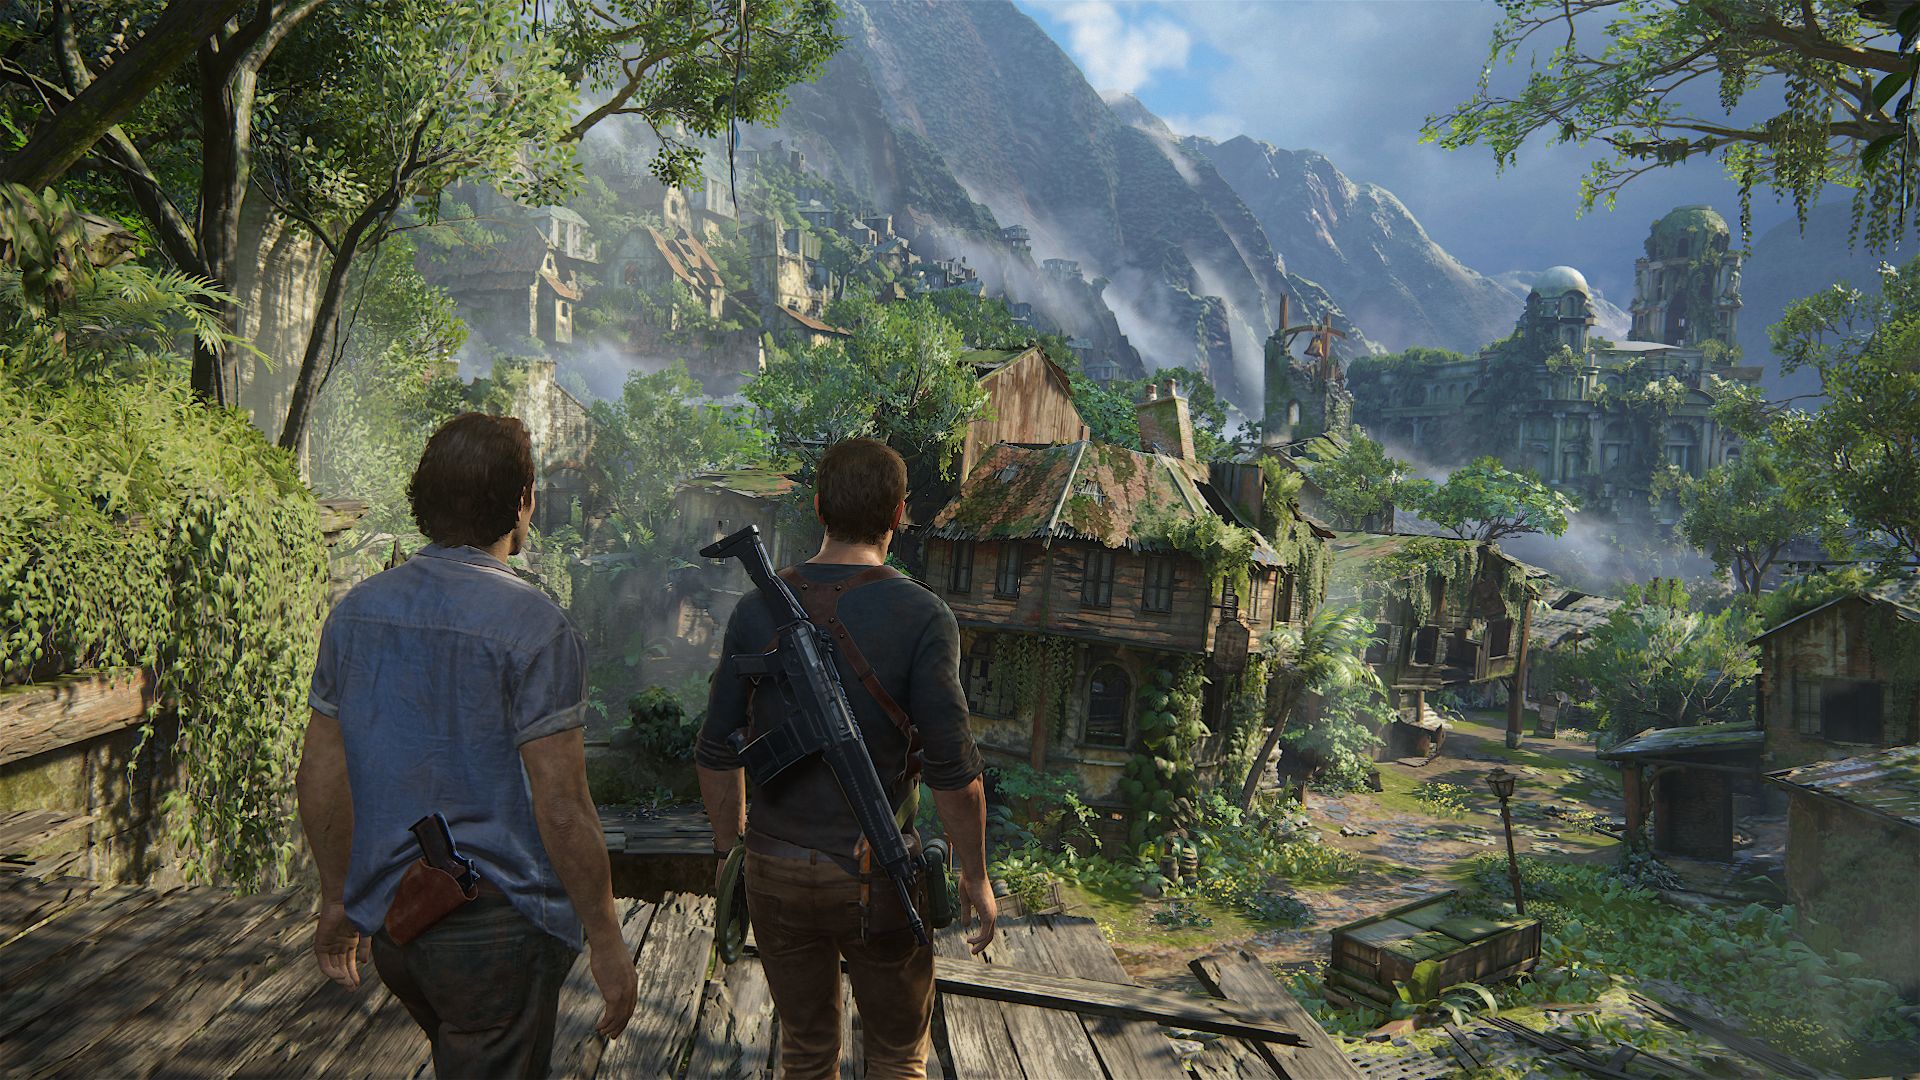 Game PS4 - Uncharted 4: A Thief's End